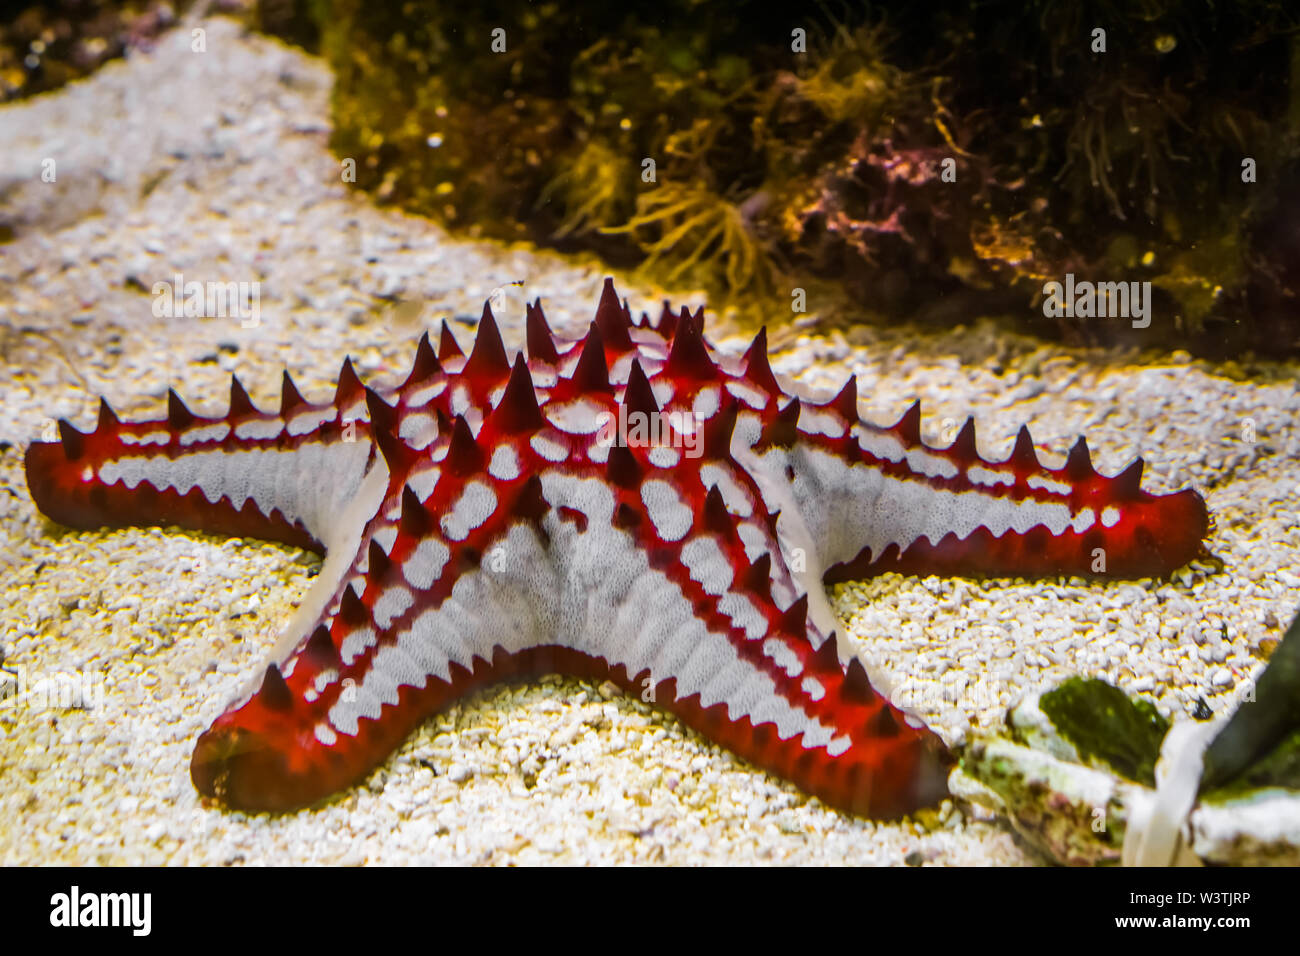 Iland Sea Star with Colored Heads